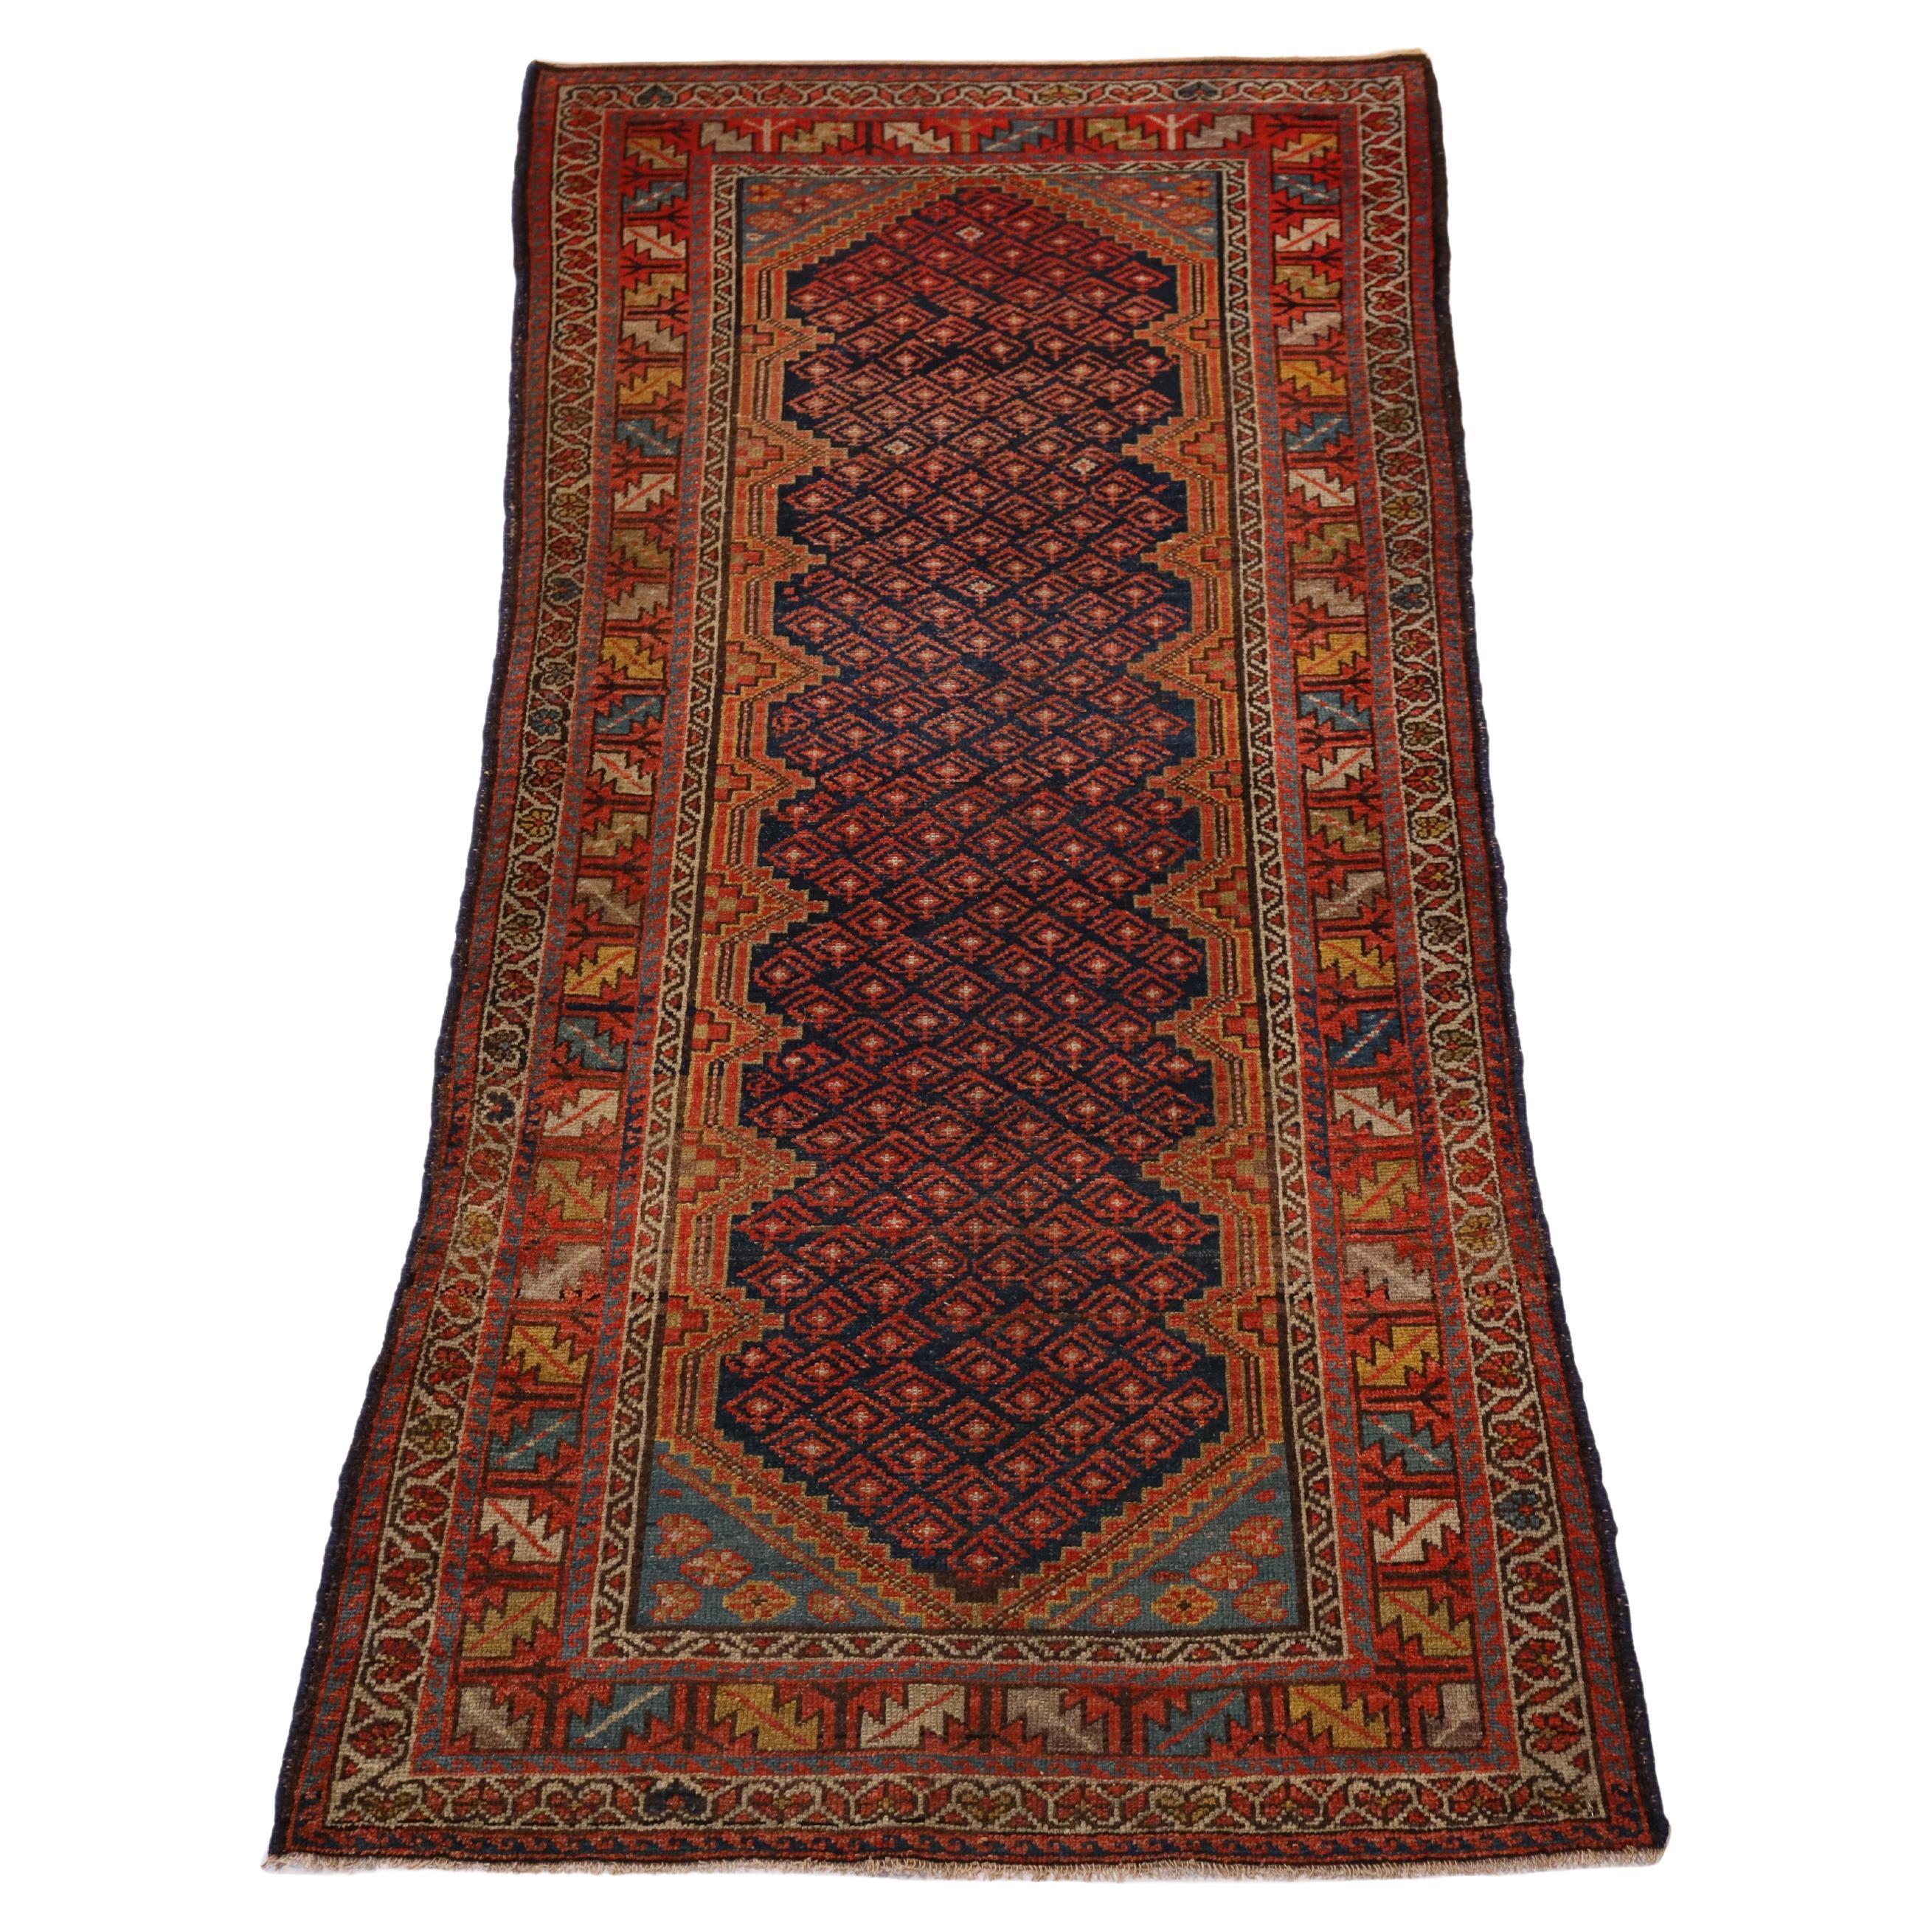 Malayer Antique Rug, Red Navy - 3' x 6'6"